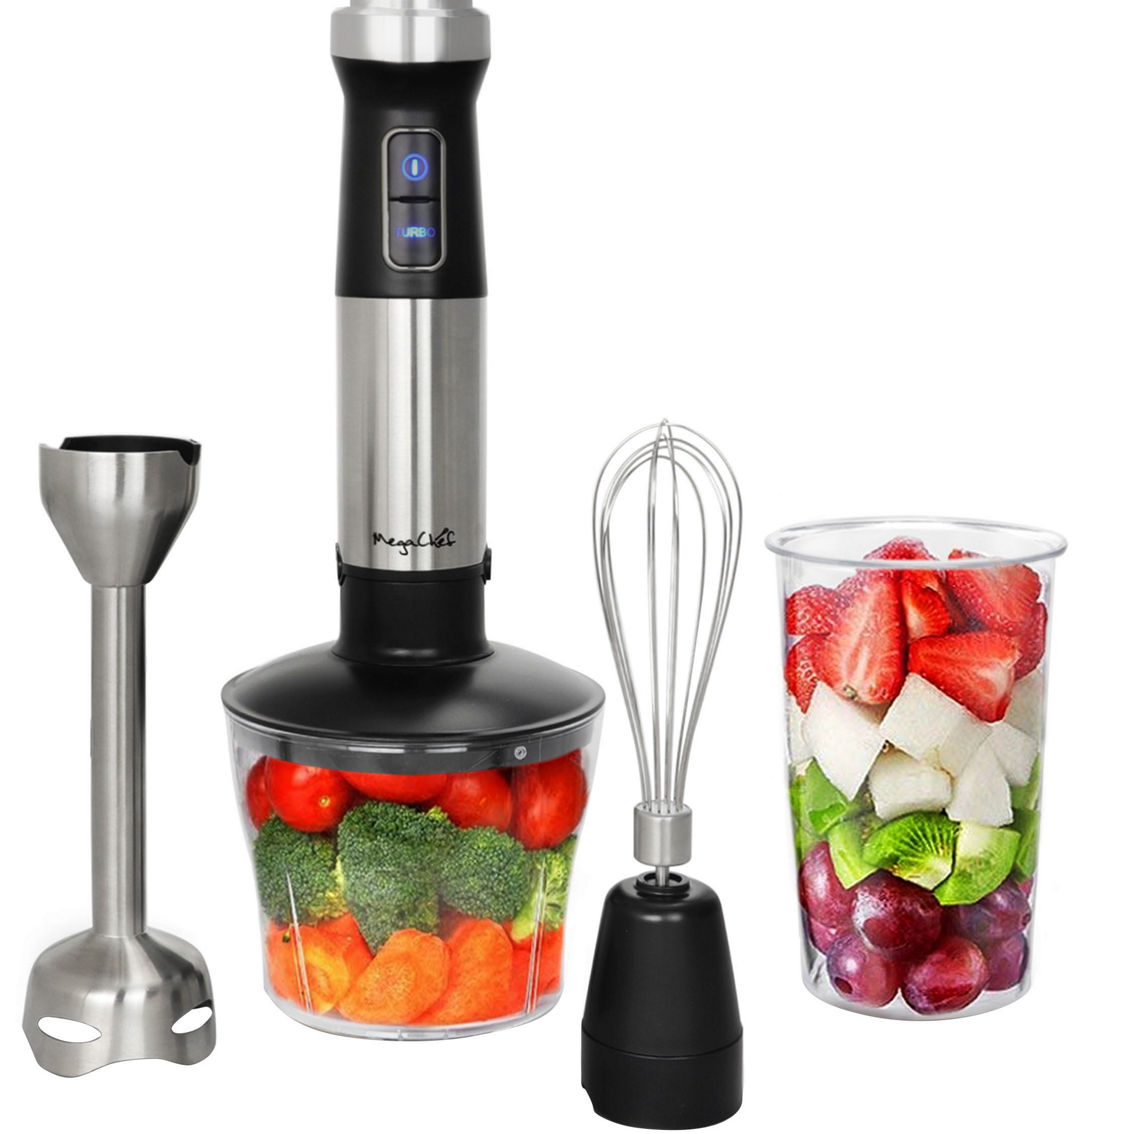 MegaChef 4 in 1 Multipurpose Immersion Hand Blender With Speed Control and Acces - Image 1 of 5